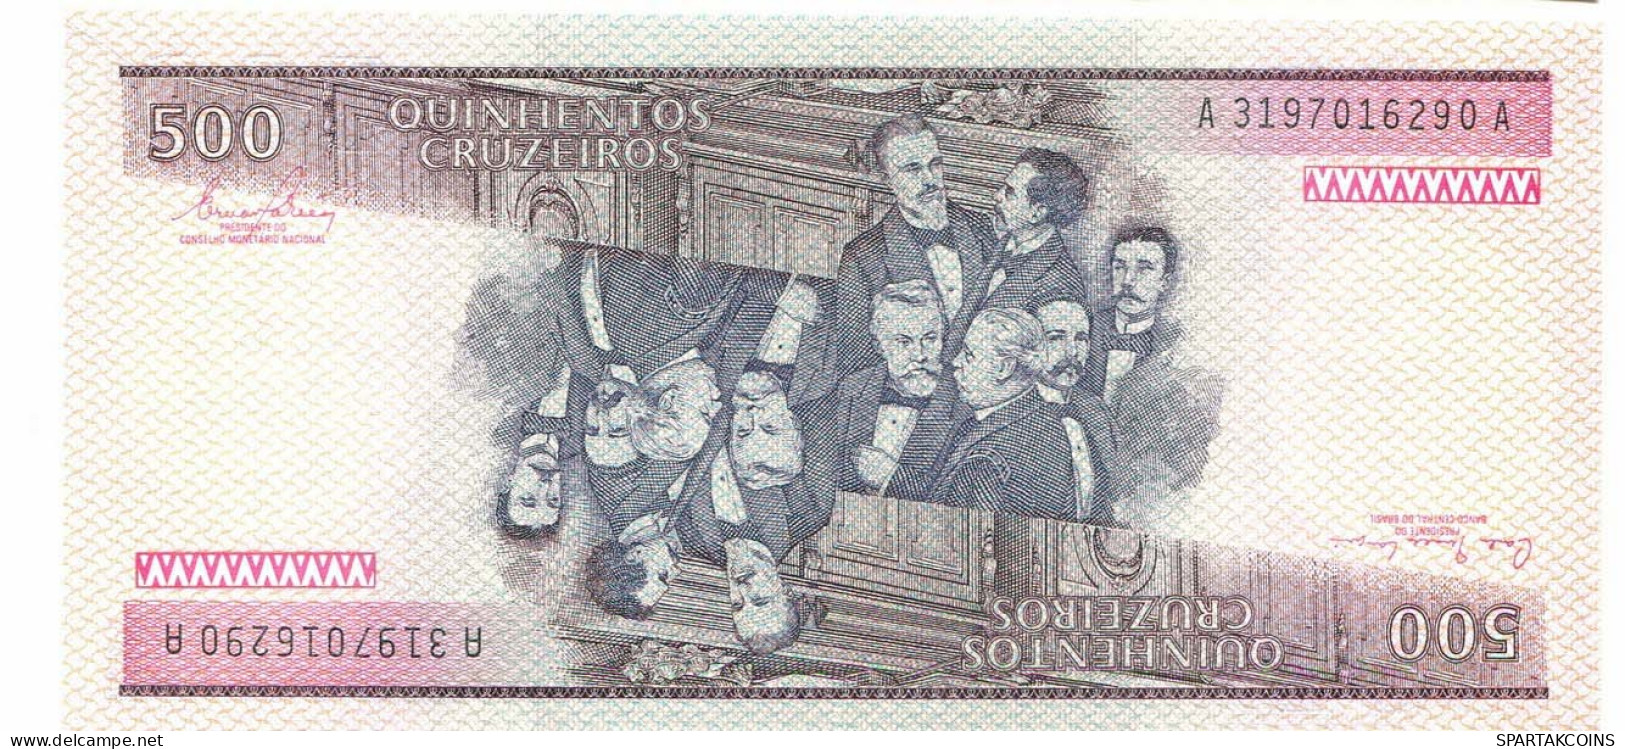 BRASIL 500 CRUZEIROS 1981 UNC Paper Money Banknote #P10865.4 - [11] Local Banknote Issues